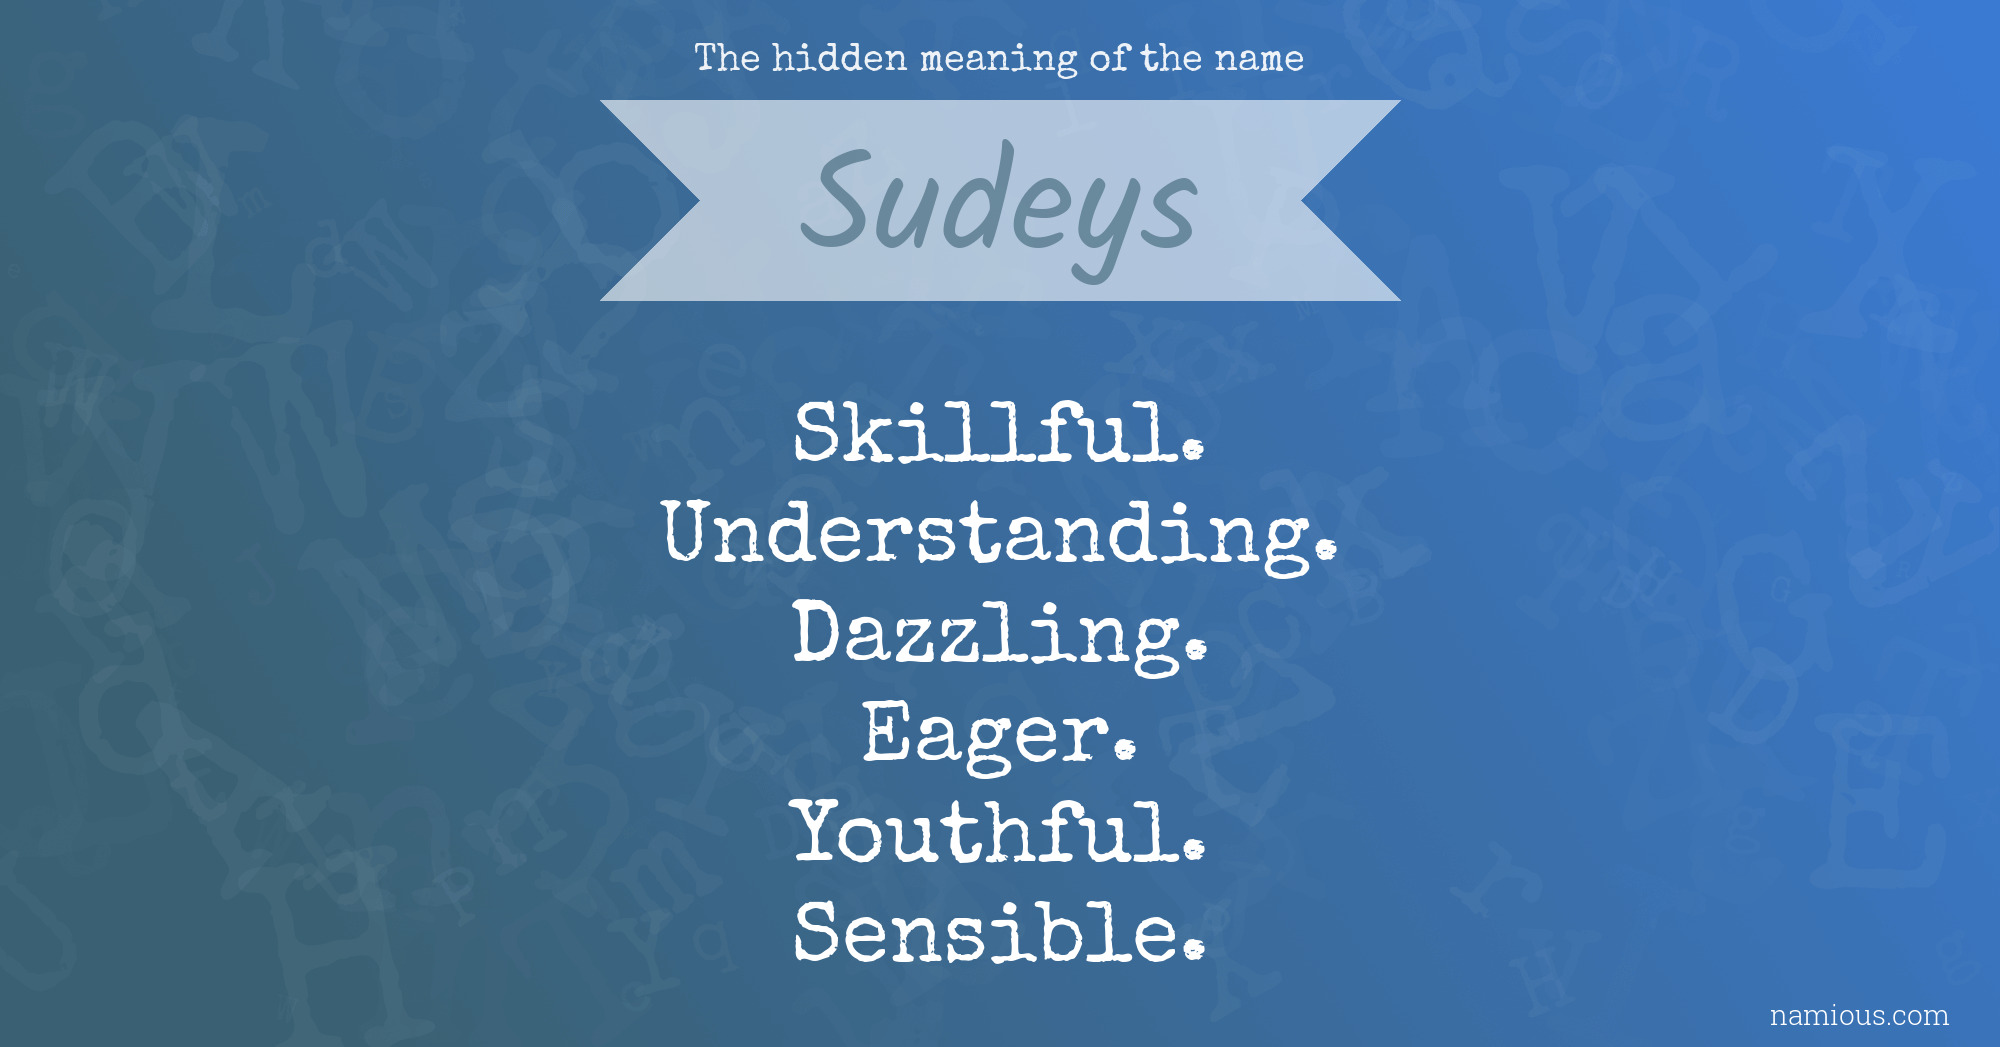 The hidden meaning of the name Sudeys